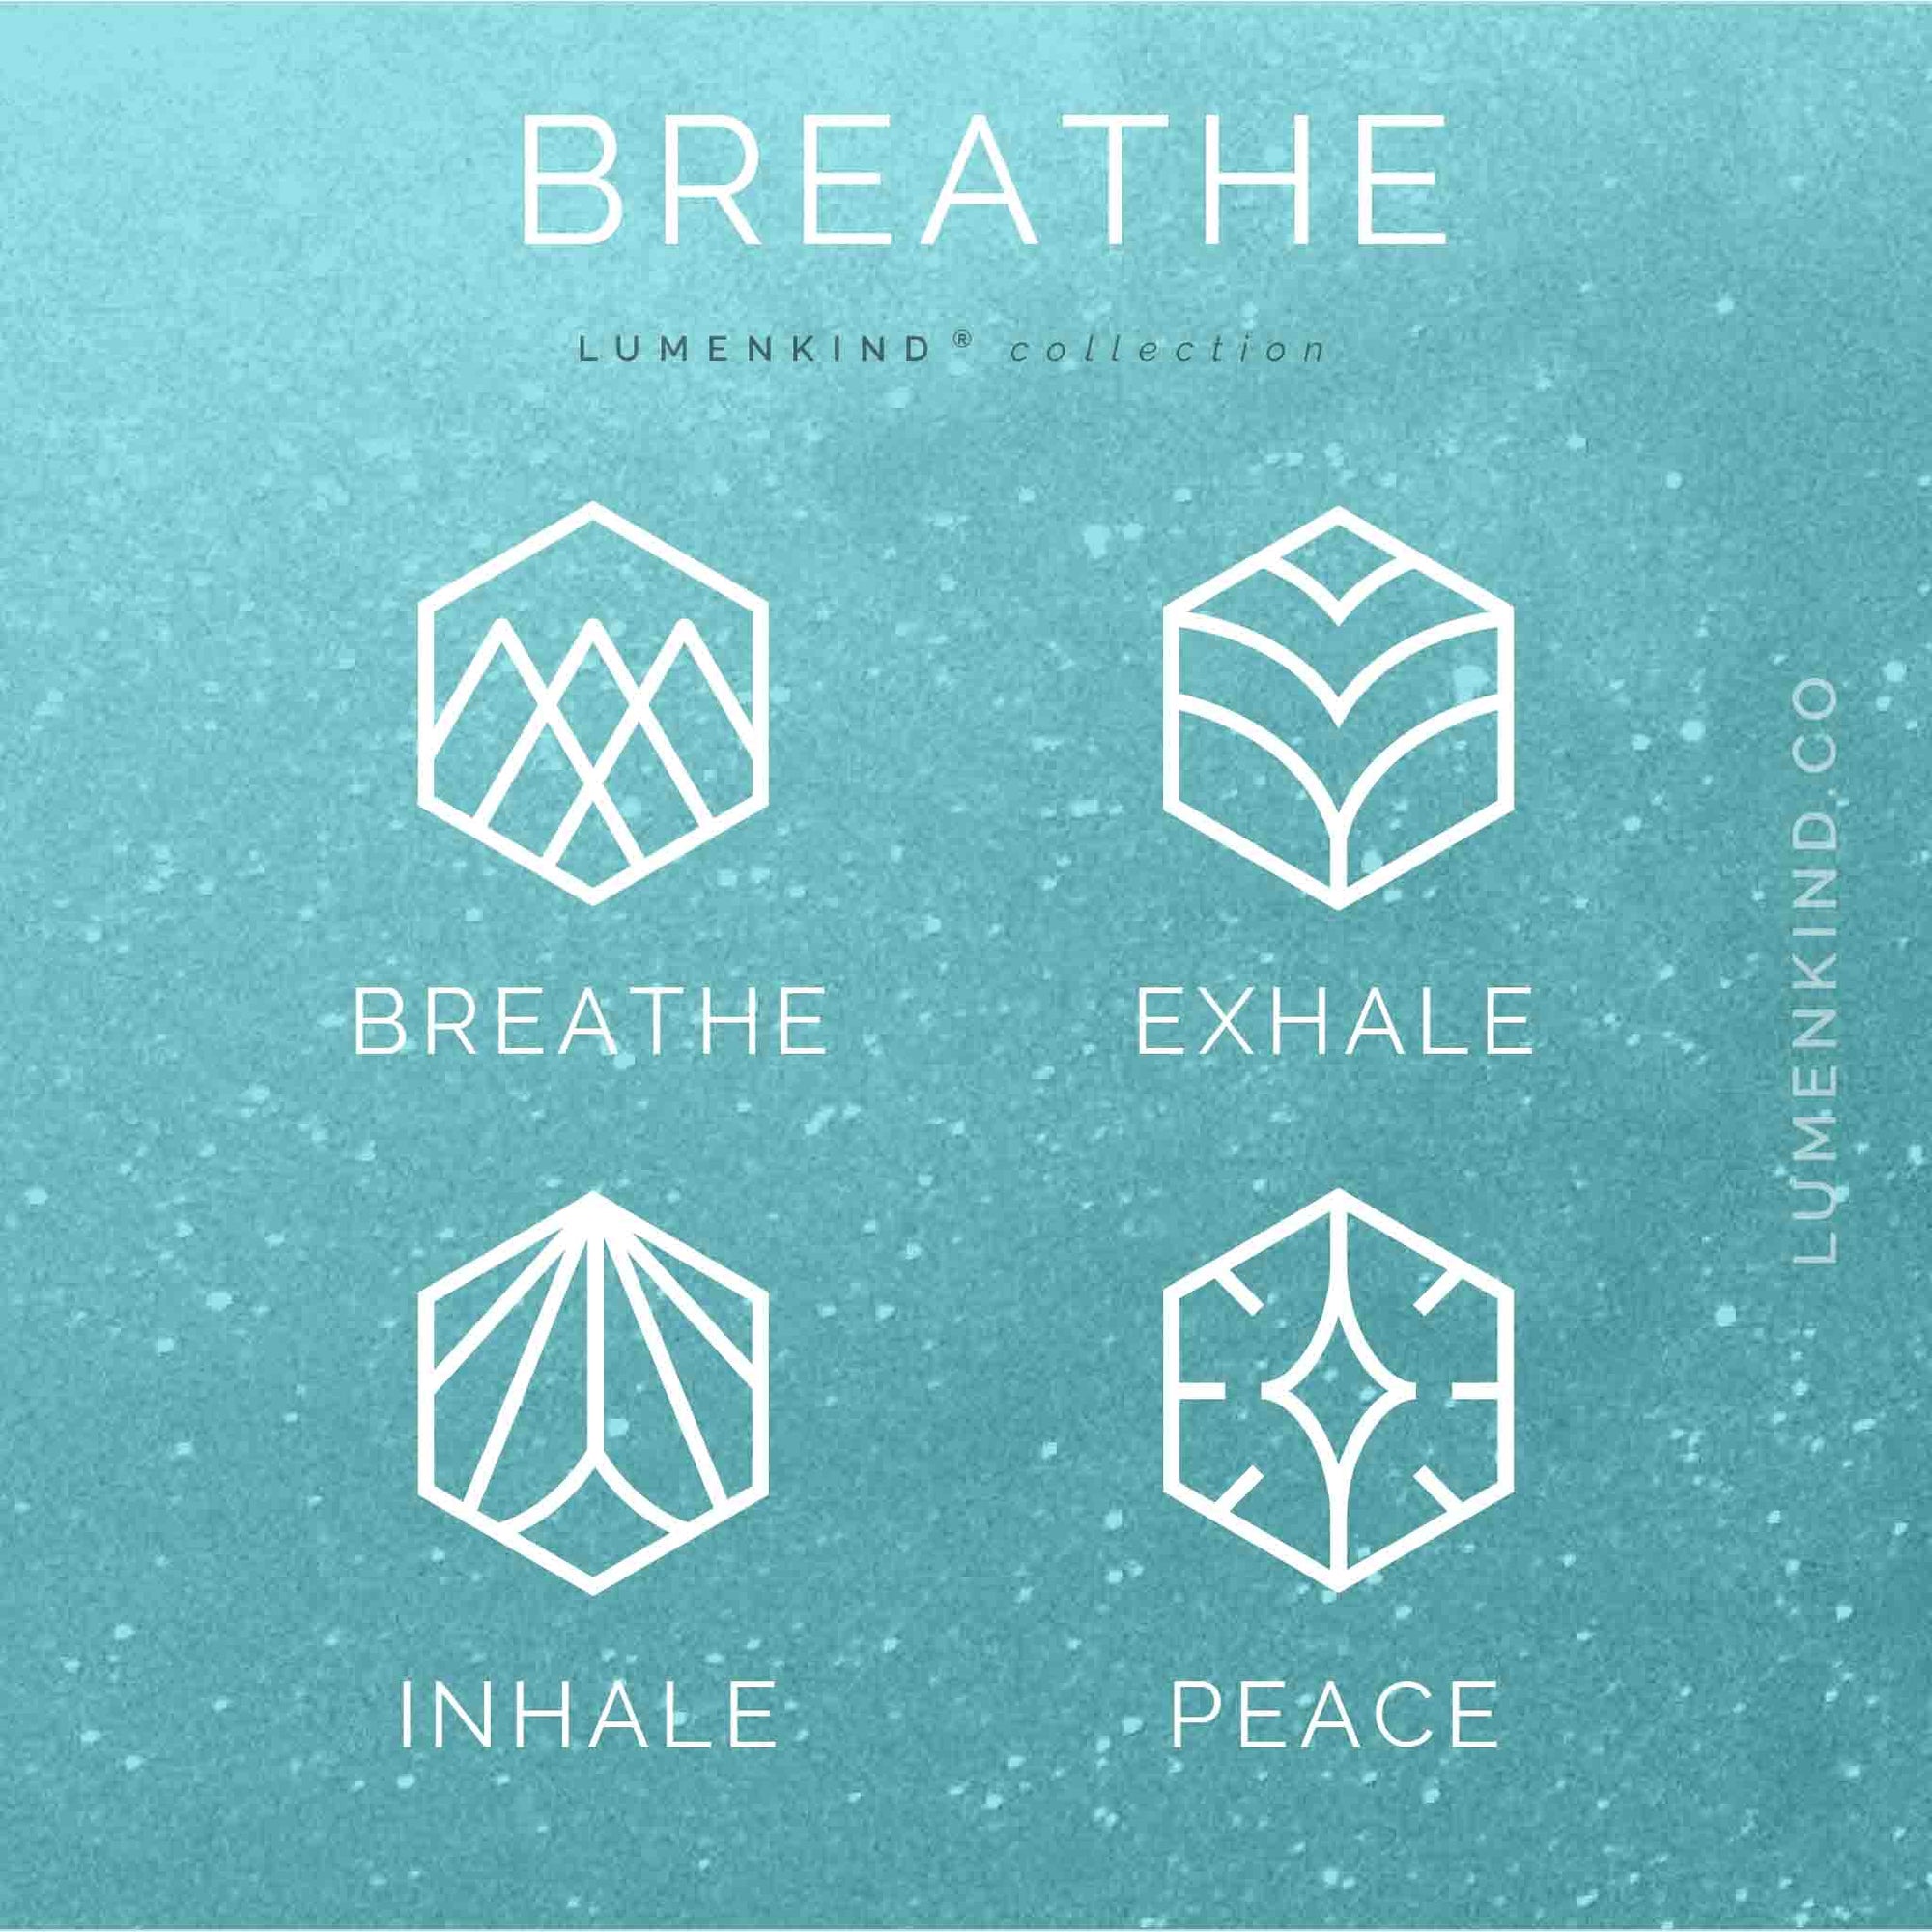 The Breathe Collection of Mindful Marks includes Breathe, Inhale, Peace, and Exhale.